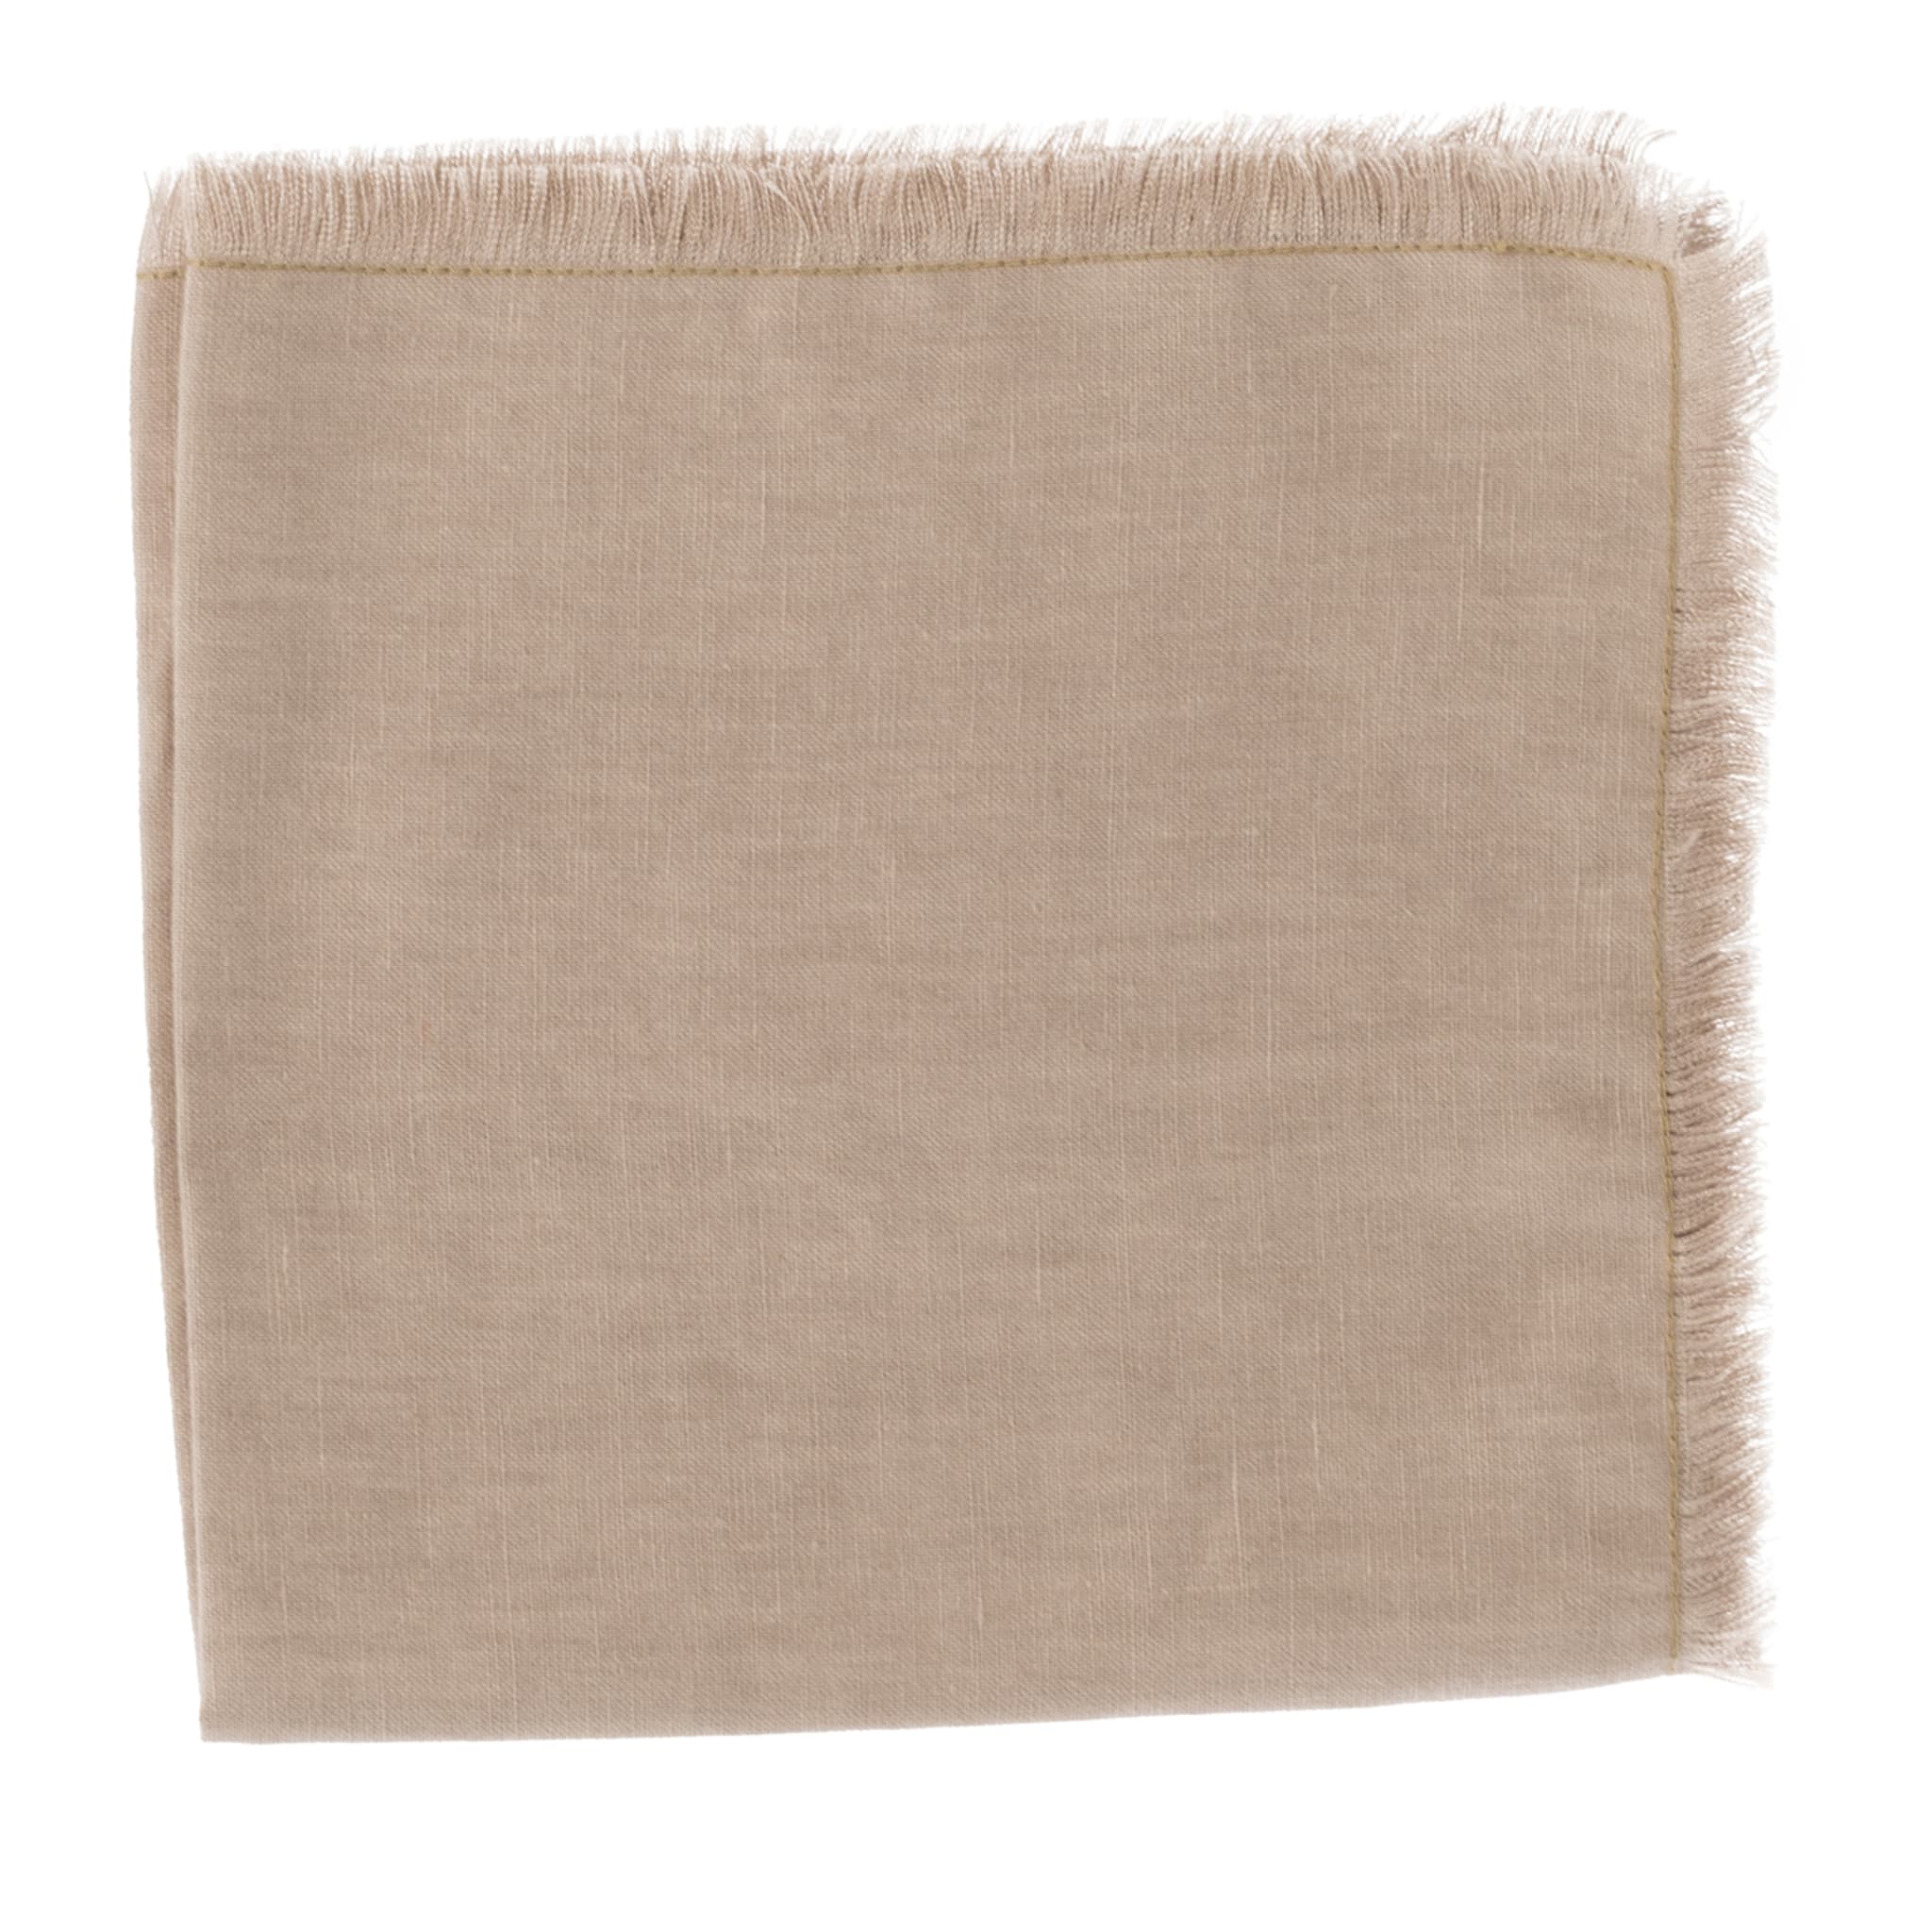 Set of 4 Luxury Hand-Fringed Beige Pure Linen Napkins - Main view